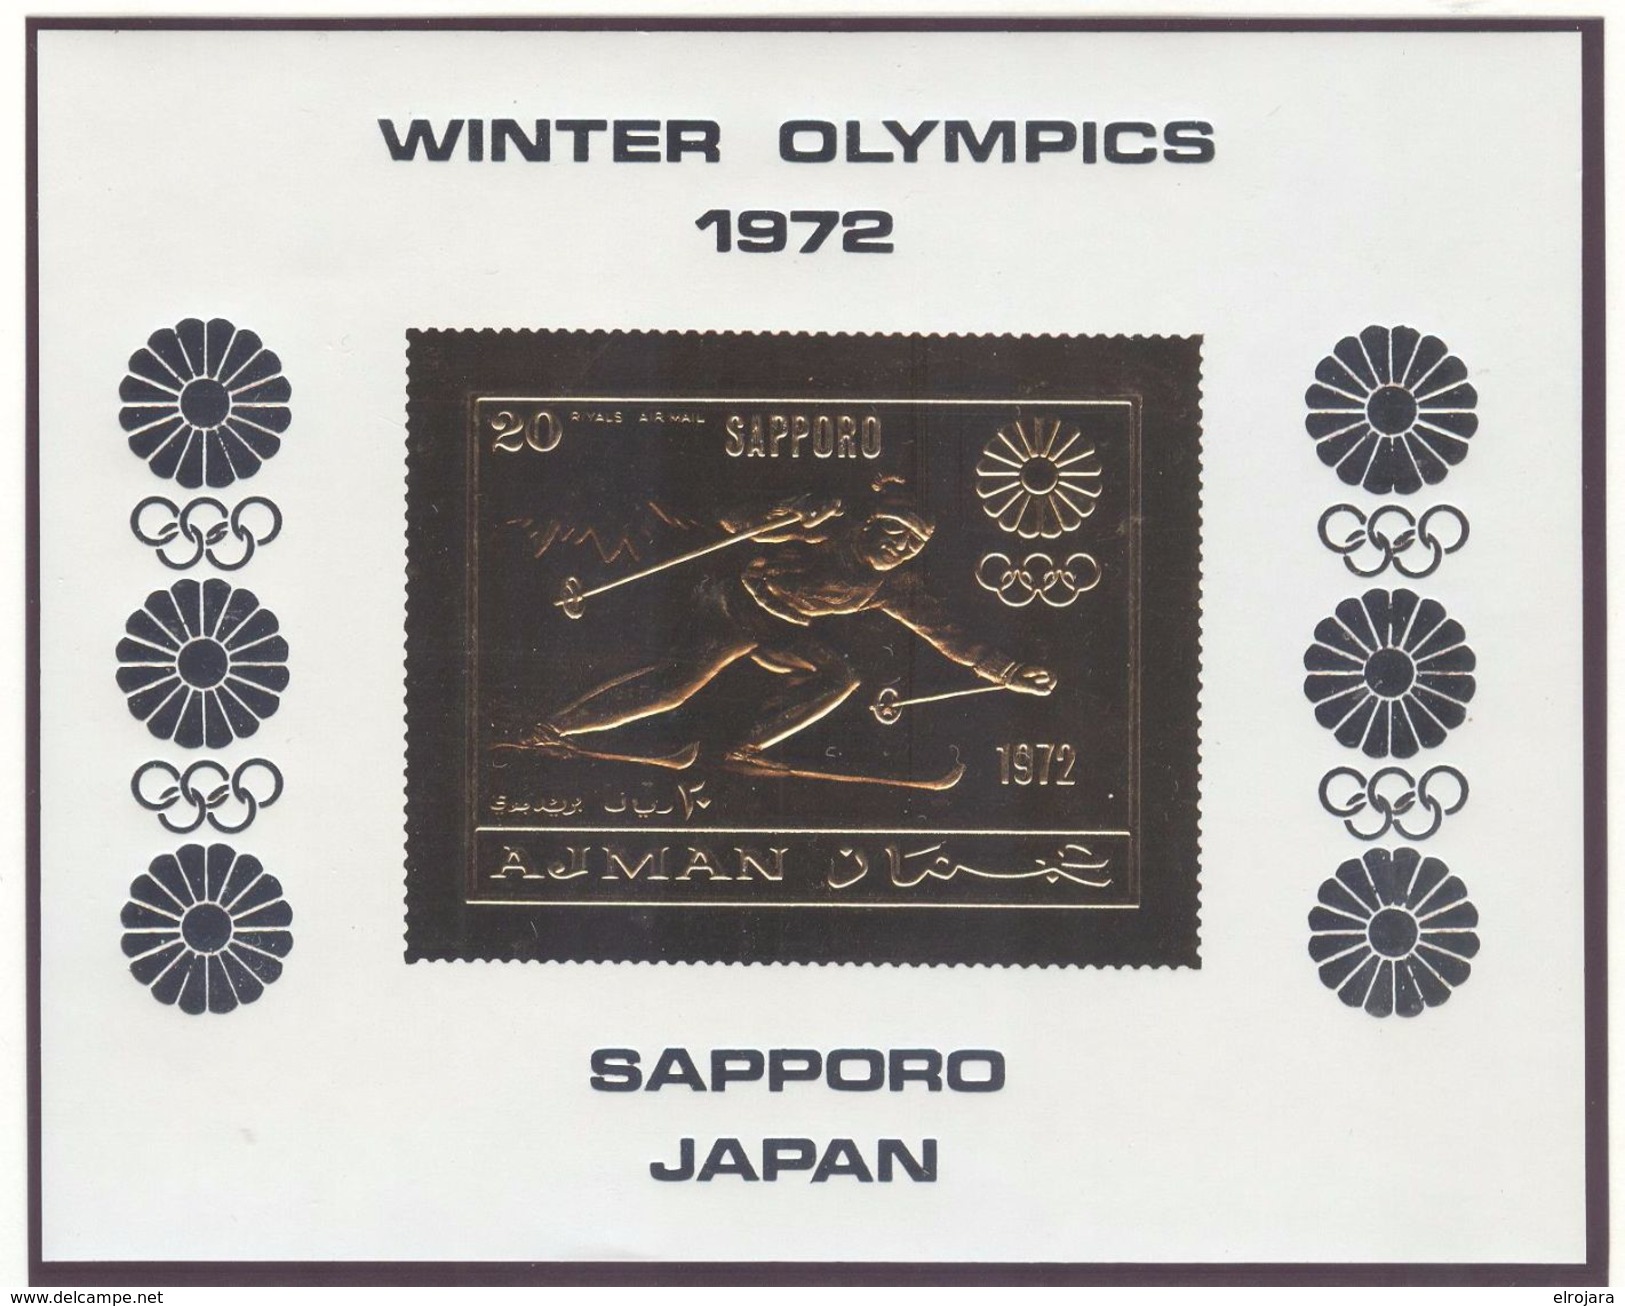 AJMAN GOLDEN Imperforated 20 R Block Skiing Mint Without Hinge - Winter 1972: Sapporo